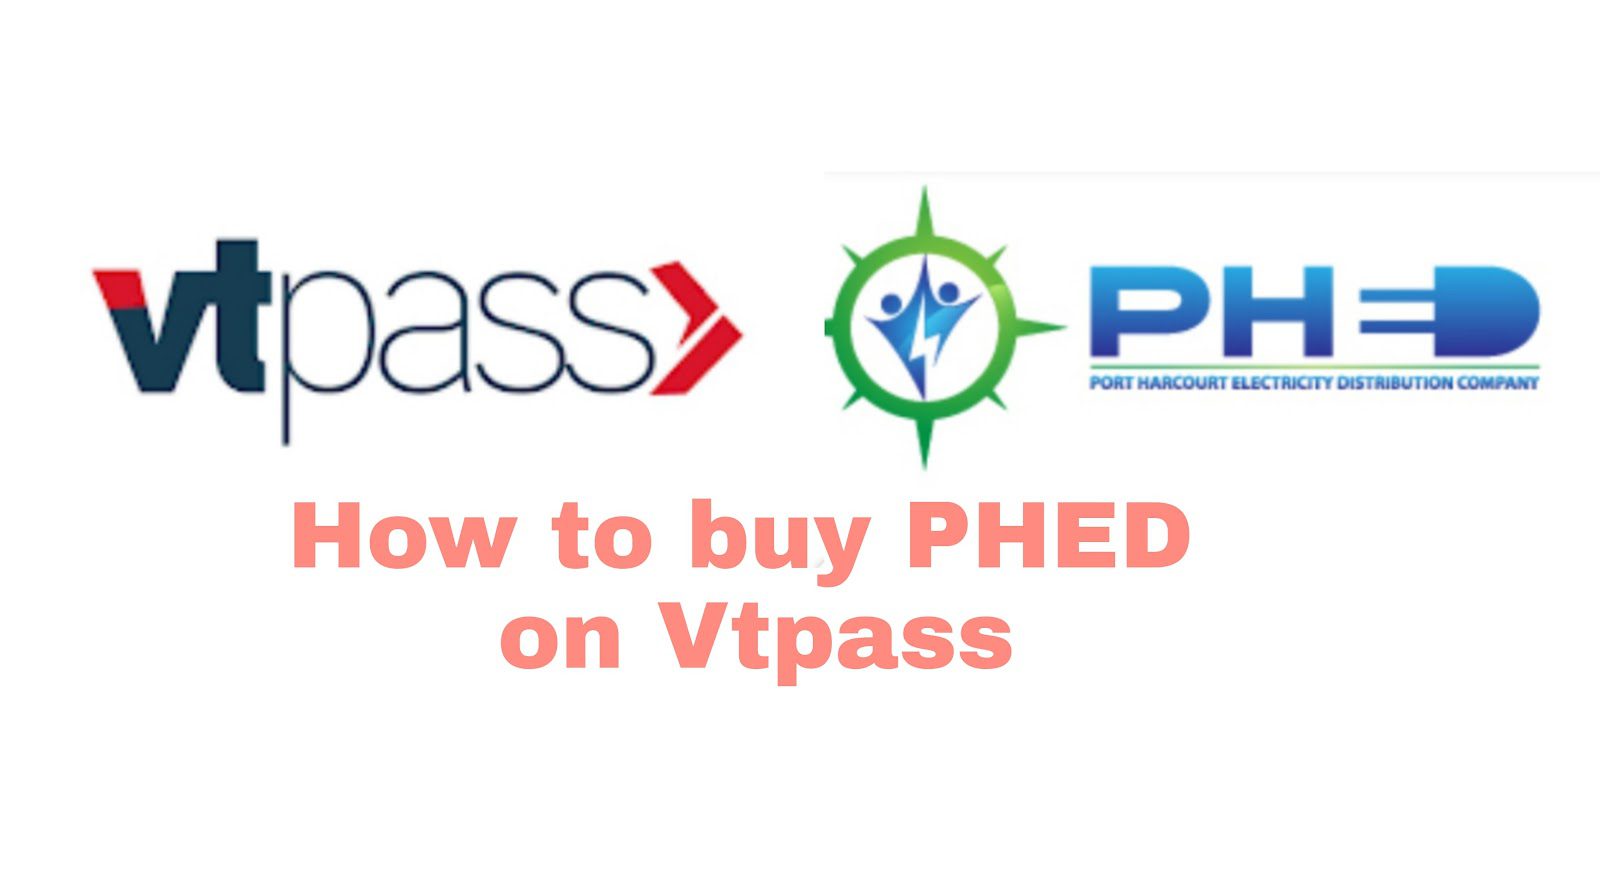 Vtpass PHED